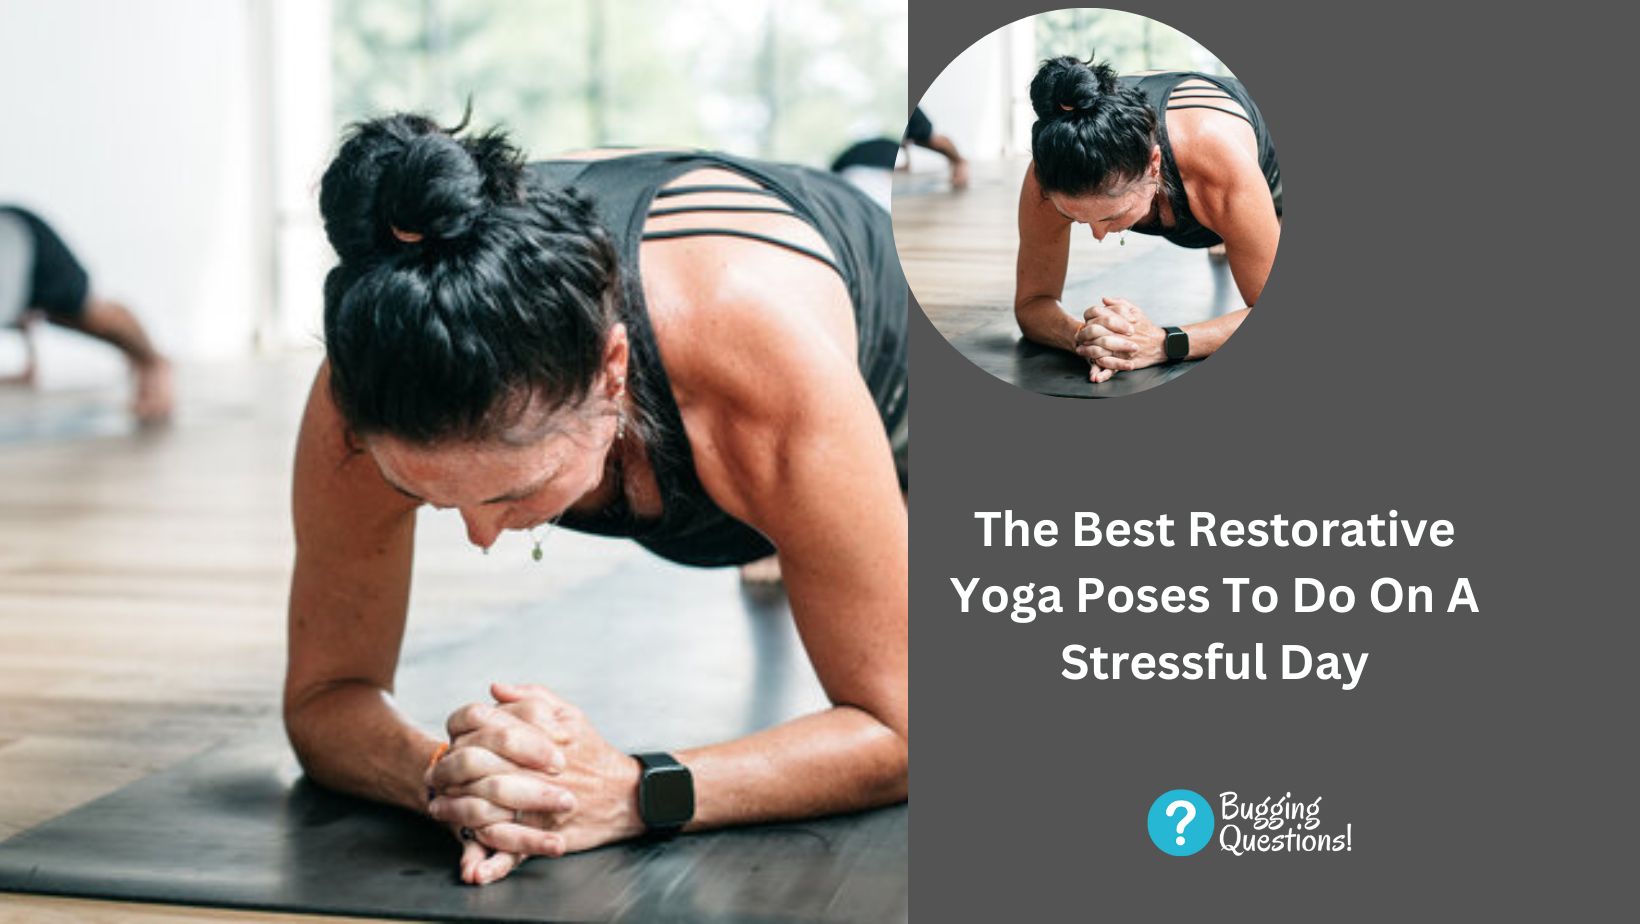 The Best Restorative Yoga Poses To Do On A Stressful Day